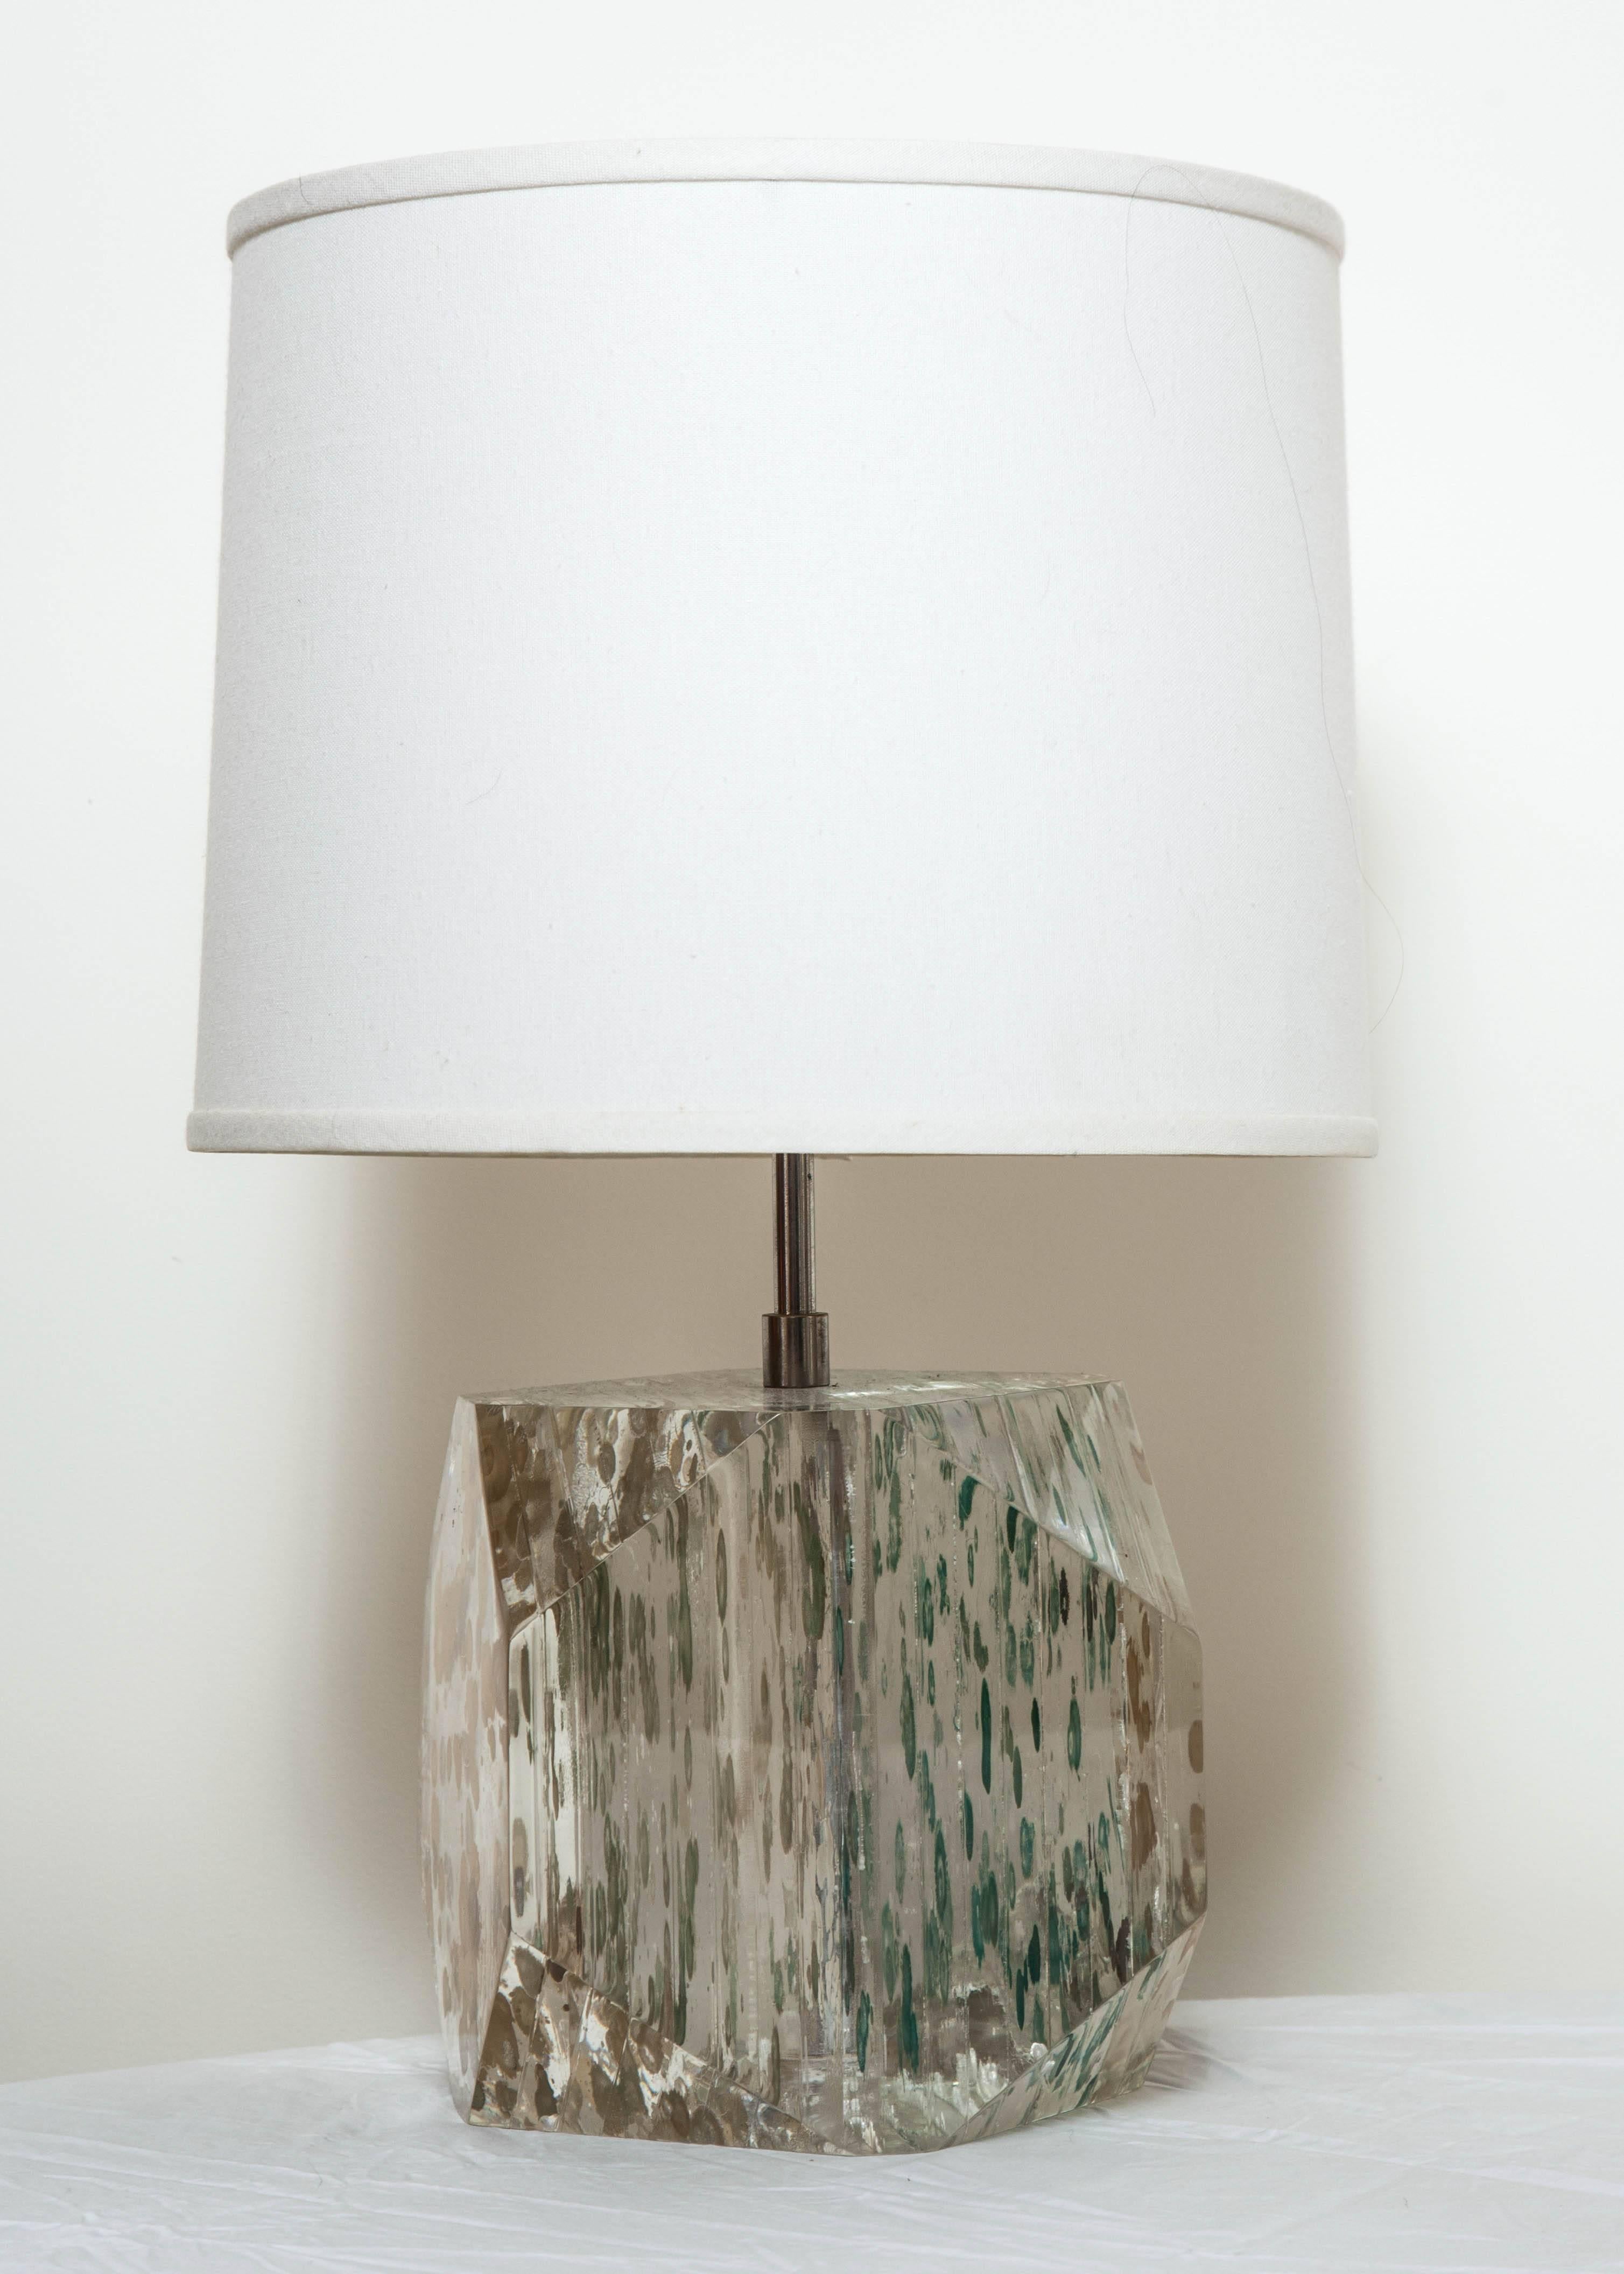 Octagonal layered Lucite table lamp by Freda Koblick with white linen shade. Lamping: 2 sockets, 100W max. Wired for USA.